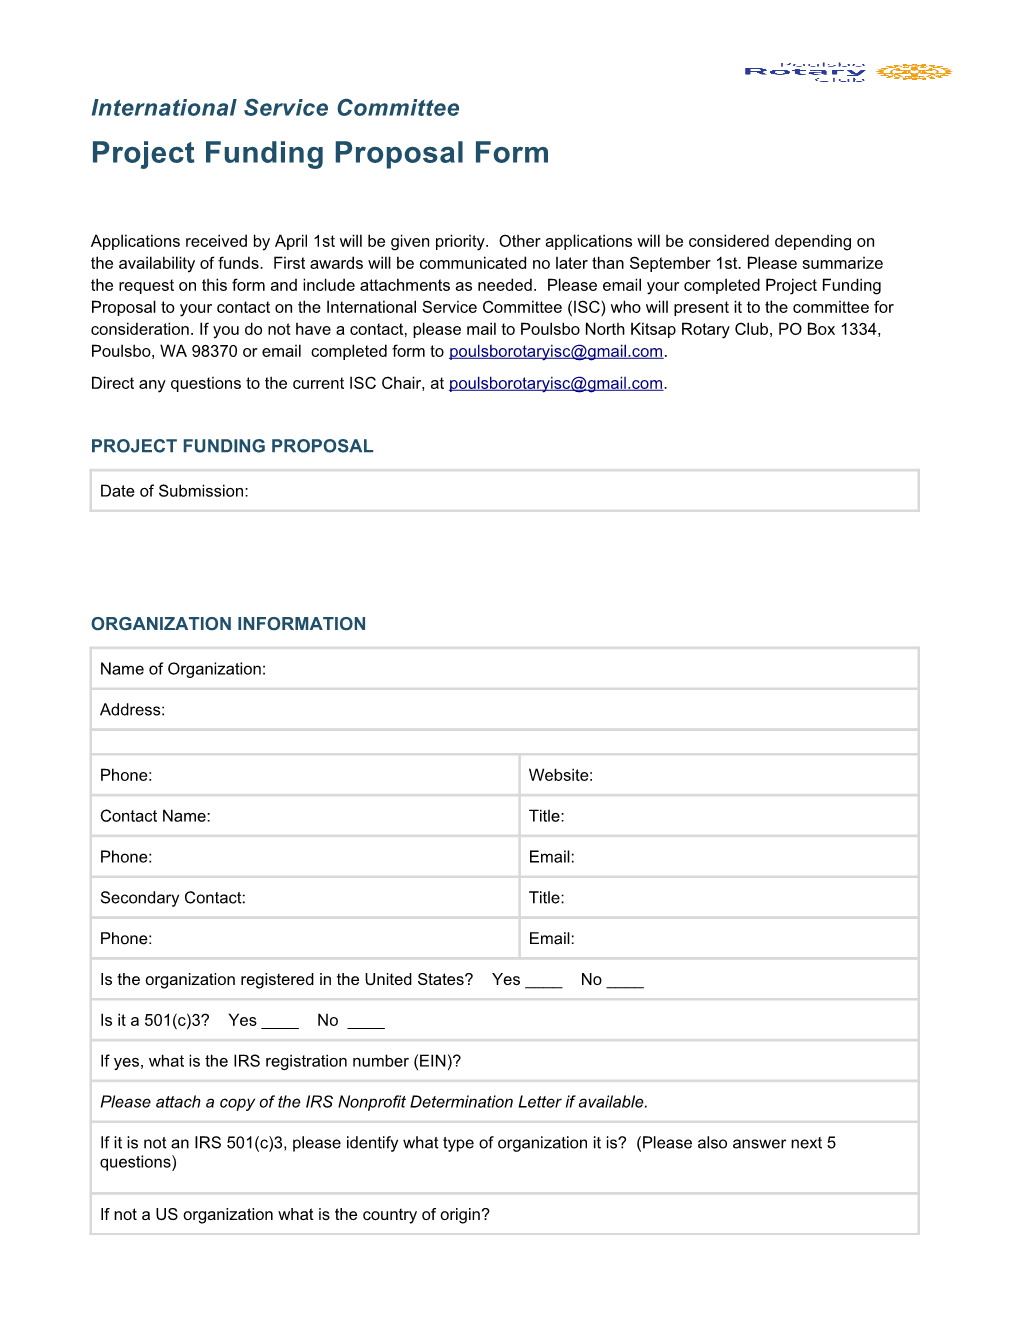 Project Funding Proposal Form